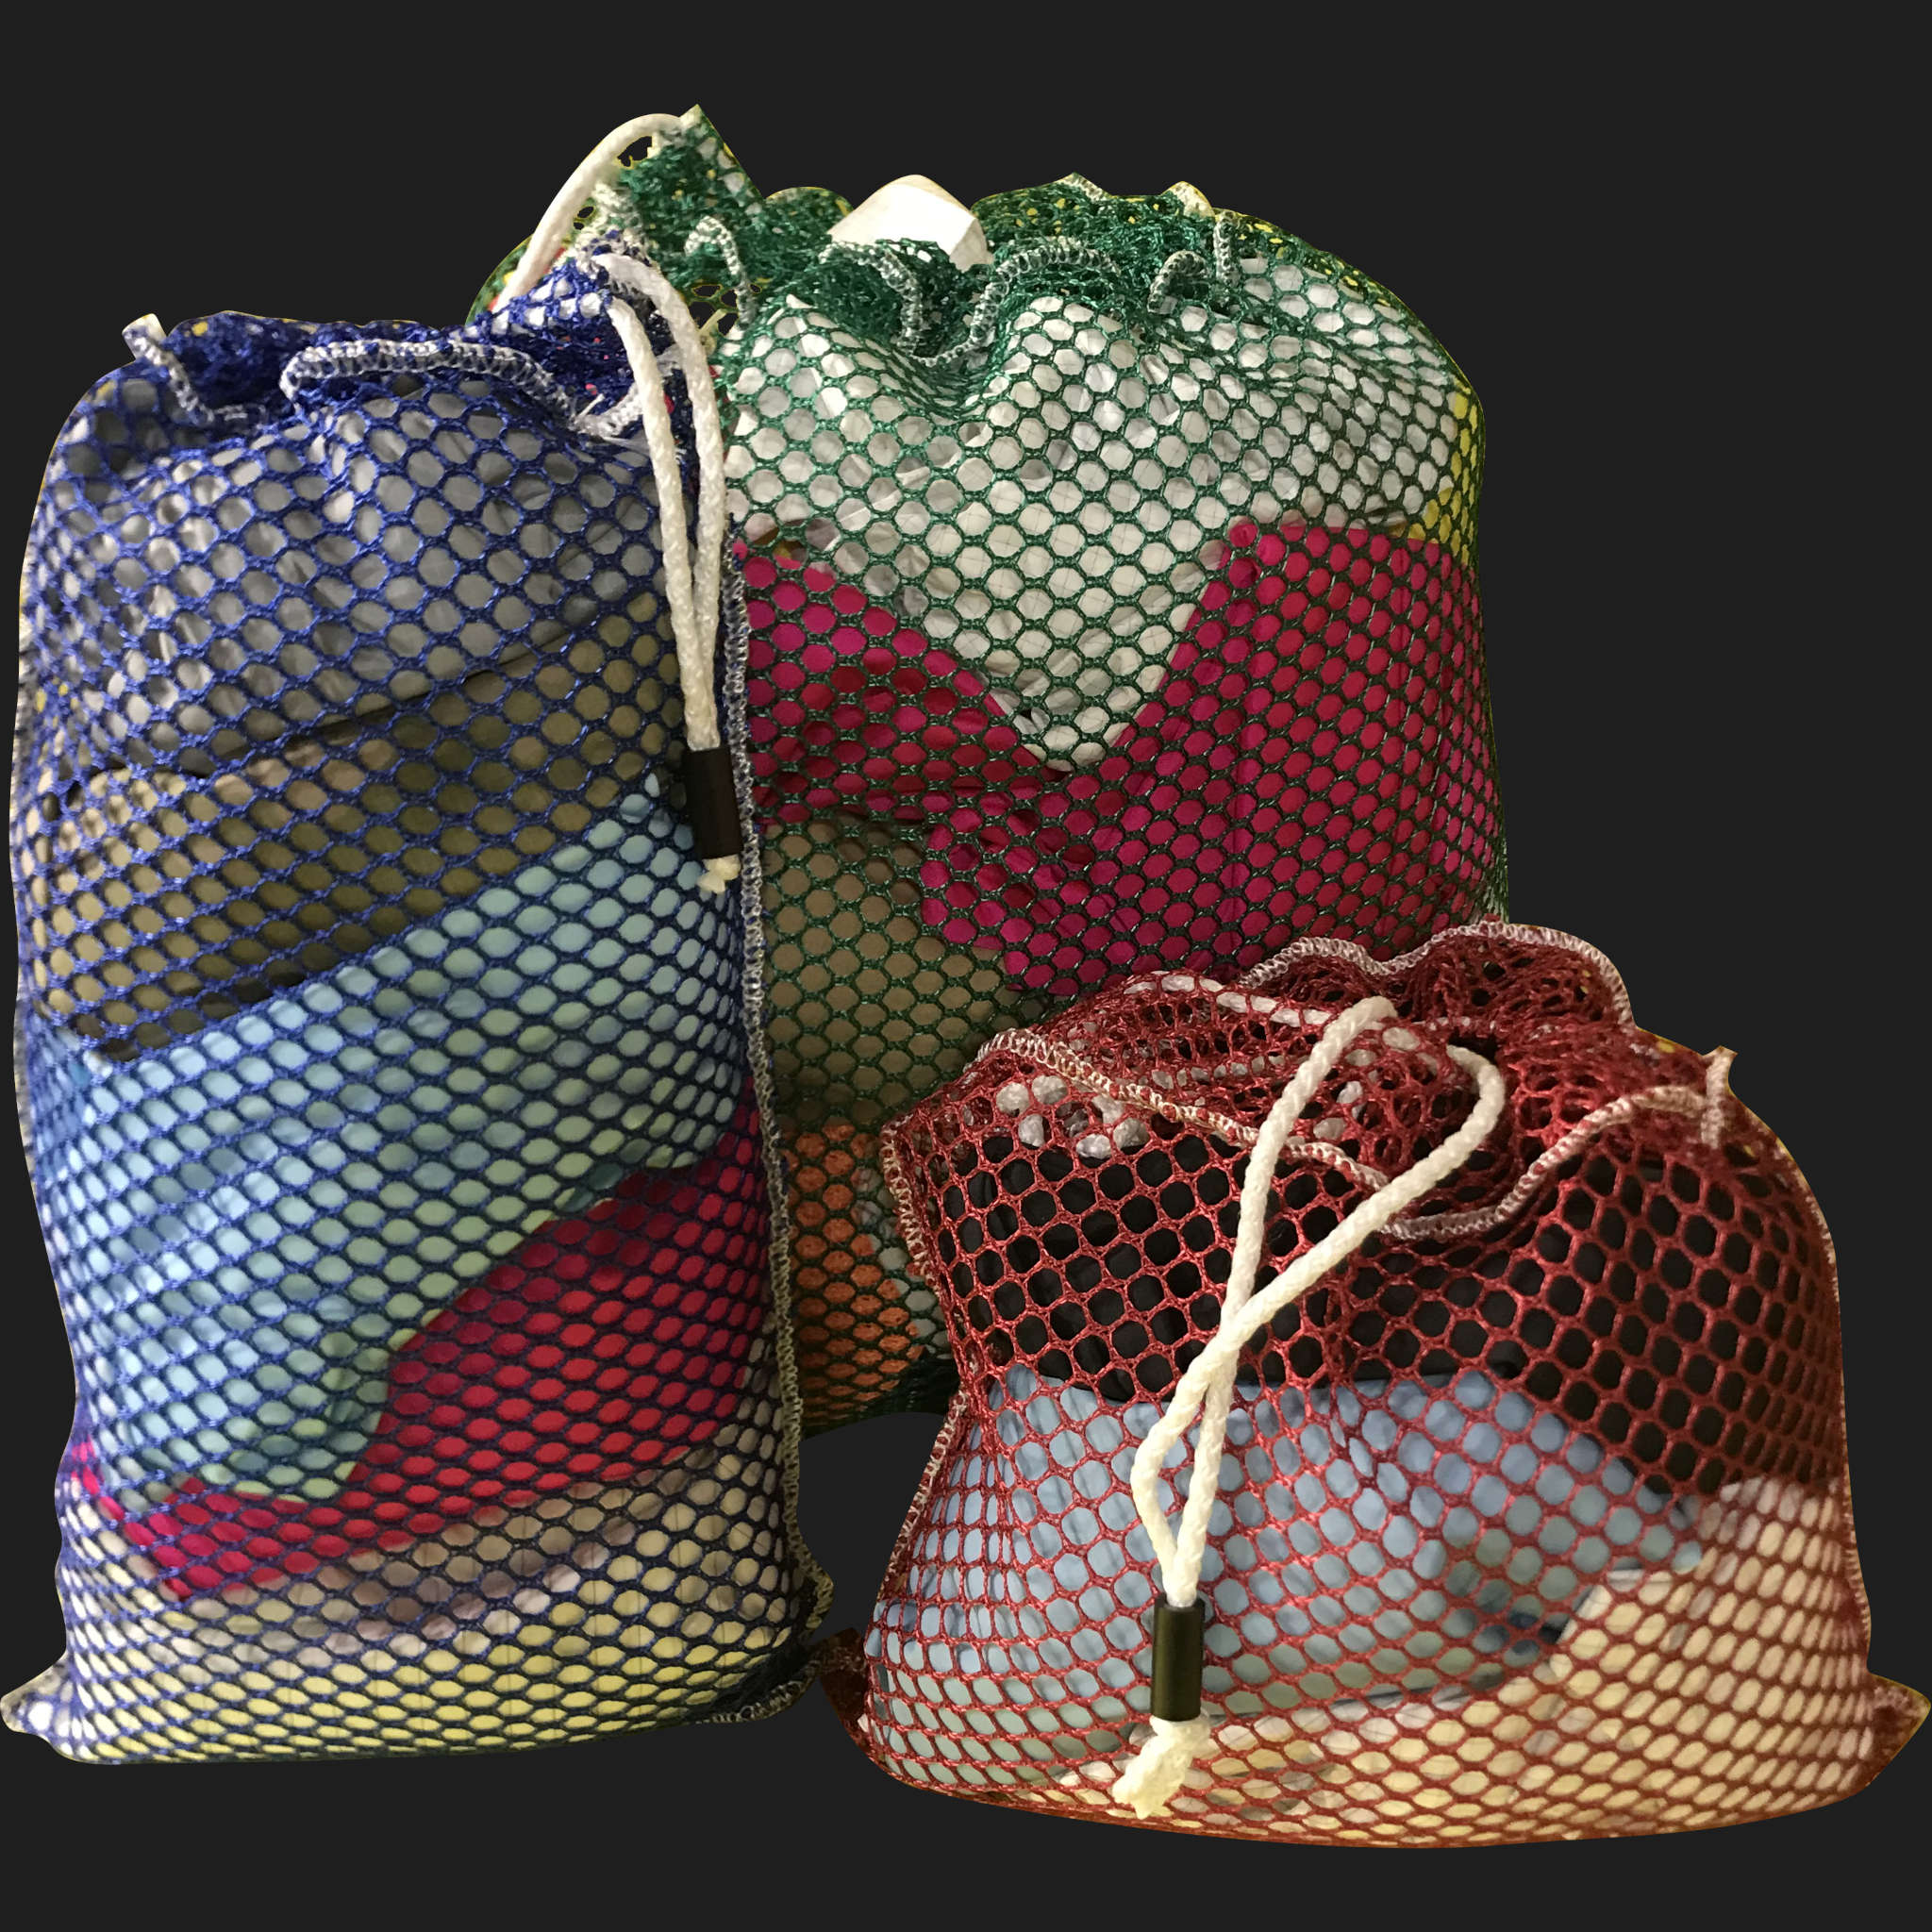 54" x 68" Customized Mesh-Net-Laundry Bags Heavy Duty with Cord and barrellock closure